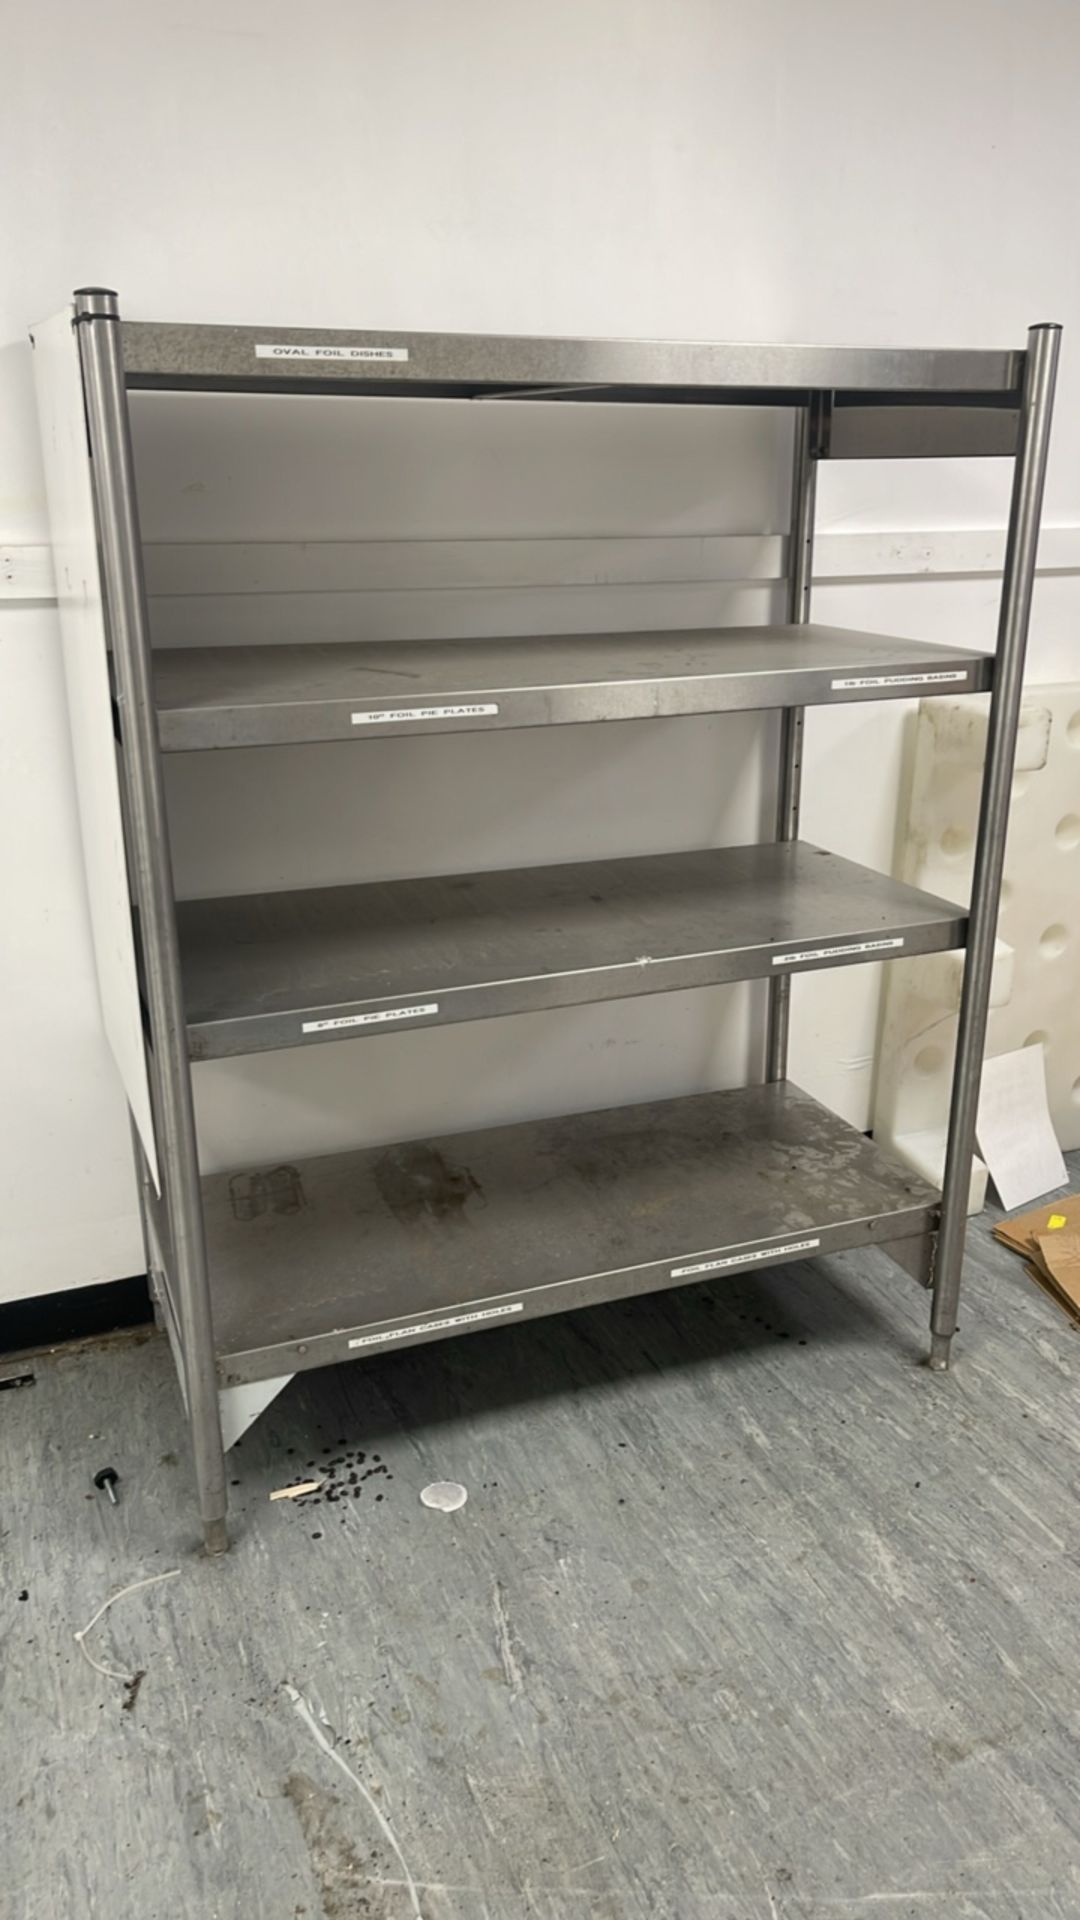 4 Shelve Stainless Steel Unit - Image 2 of 5